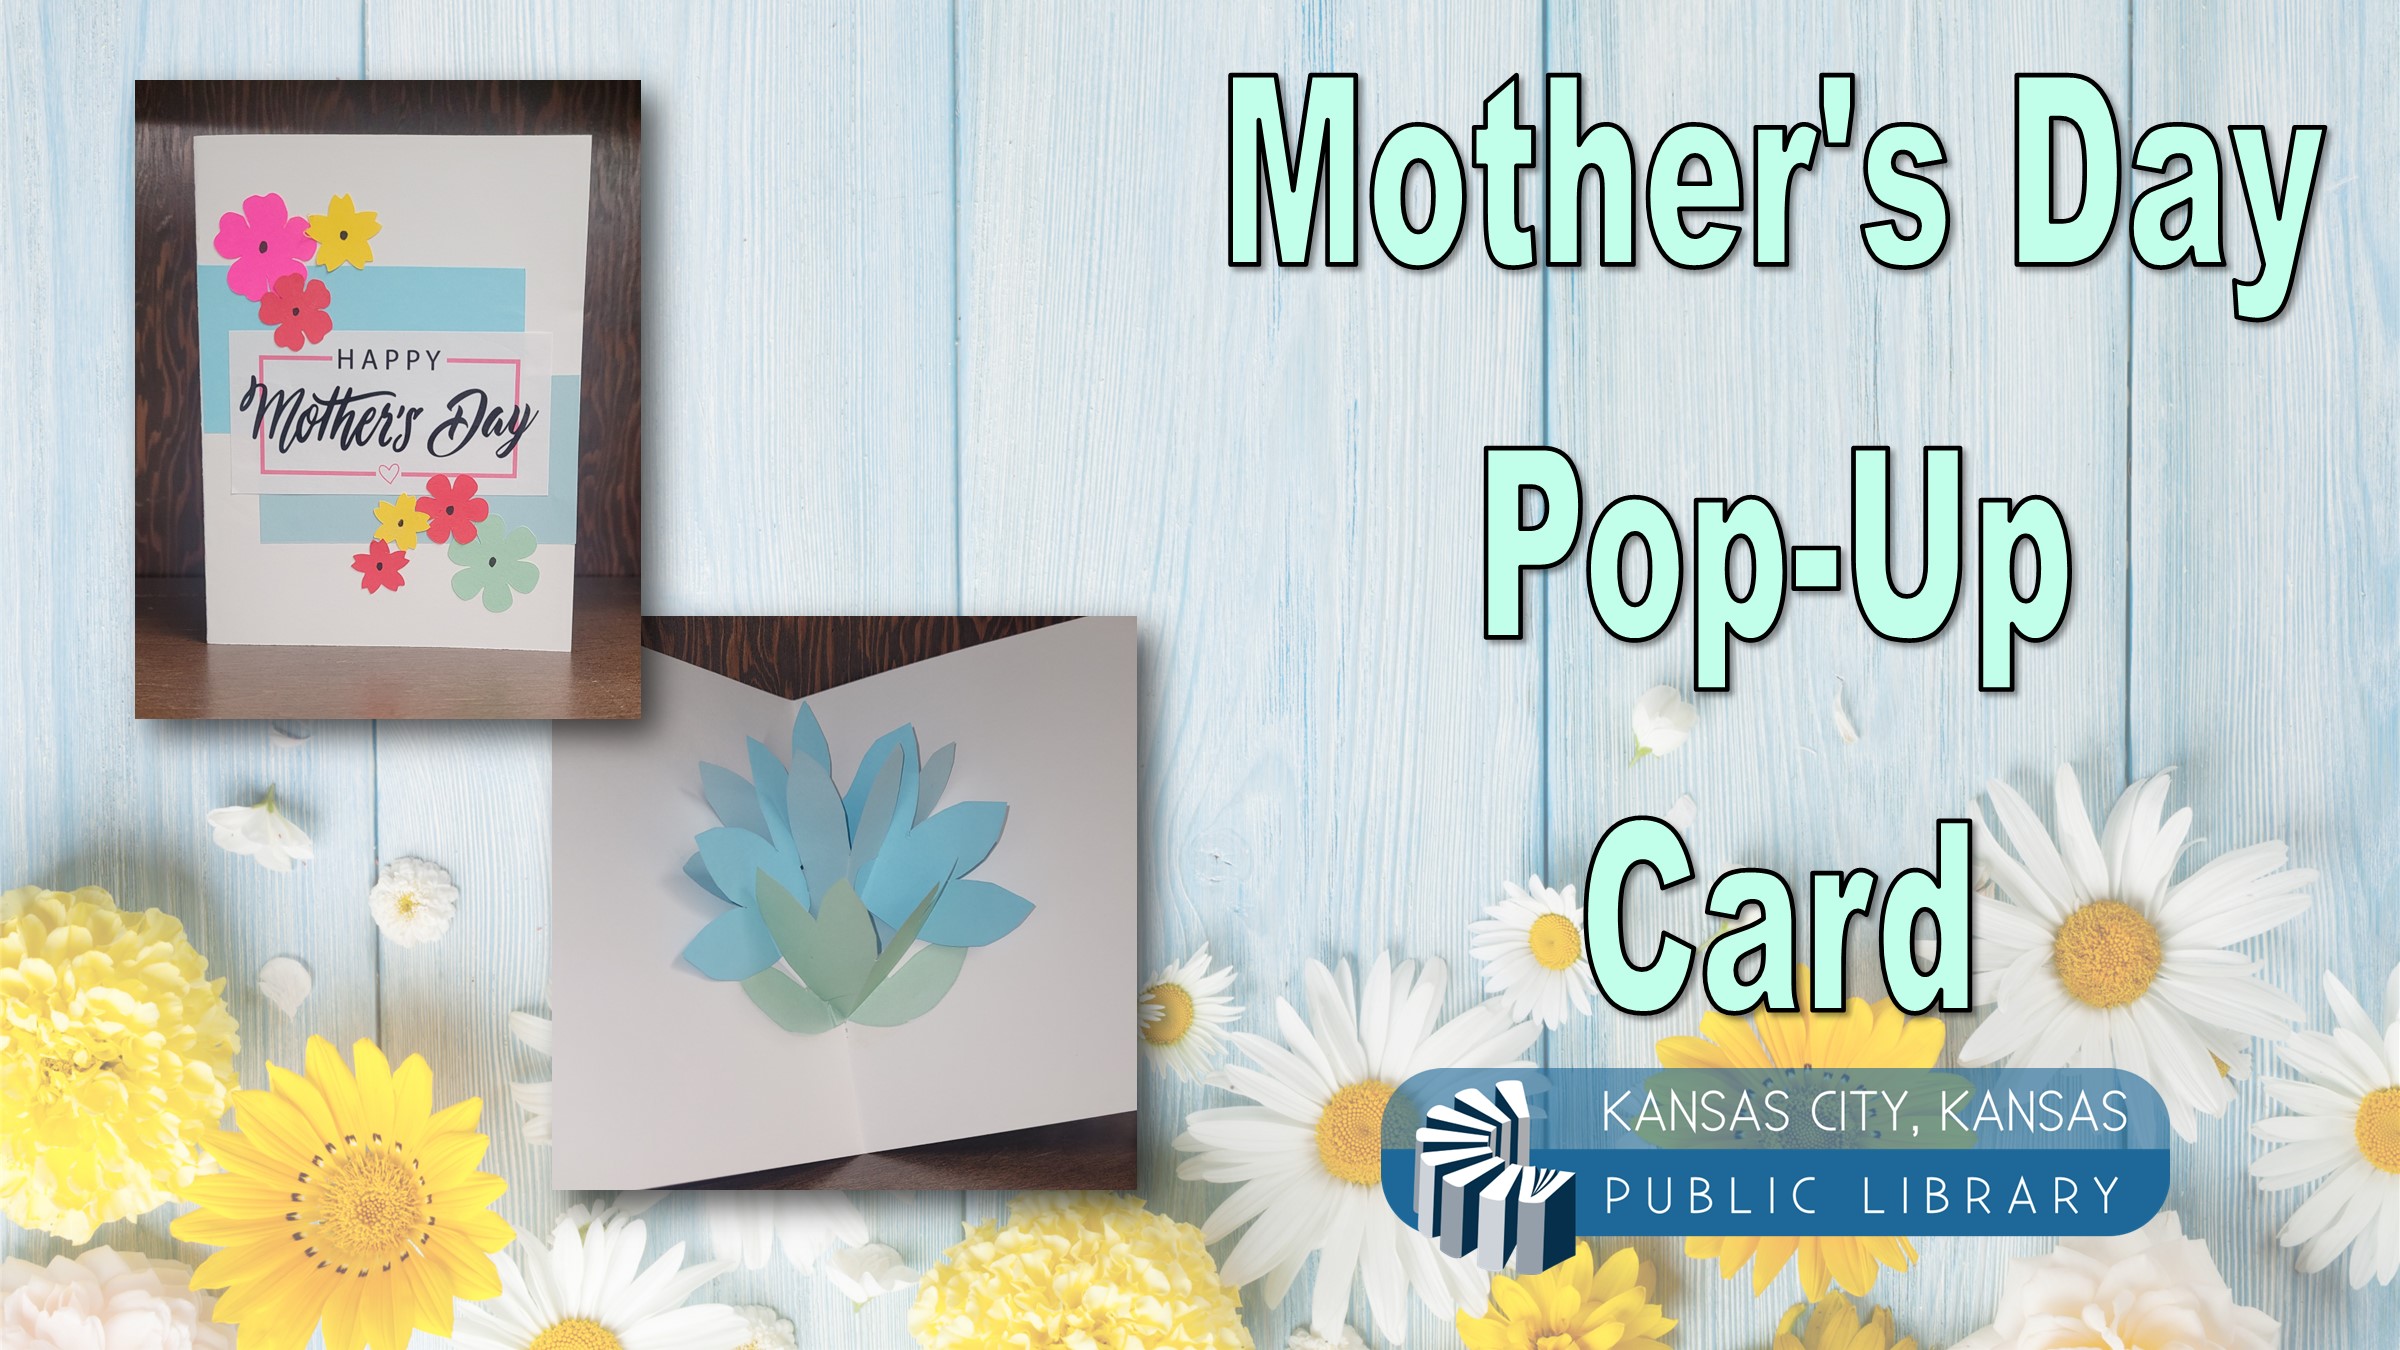 Pop-up card image with library logo on a background of flowers and blue wall